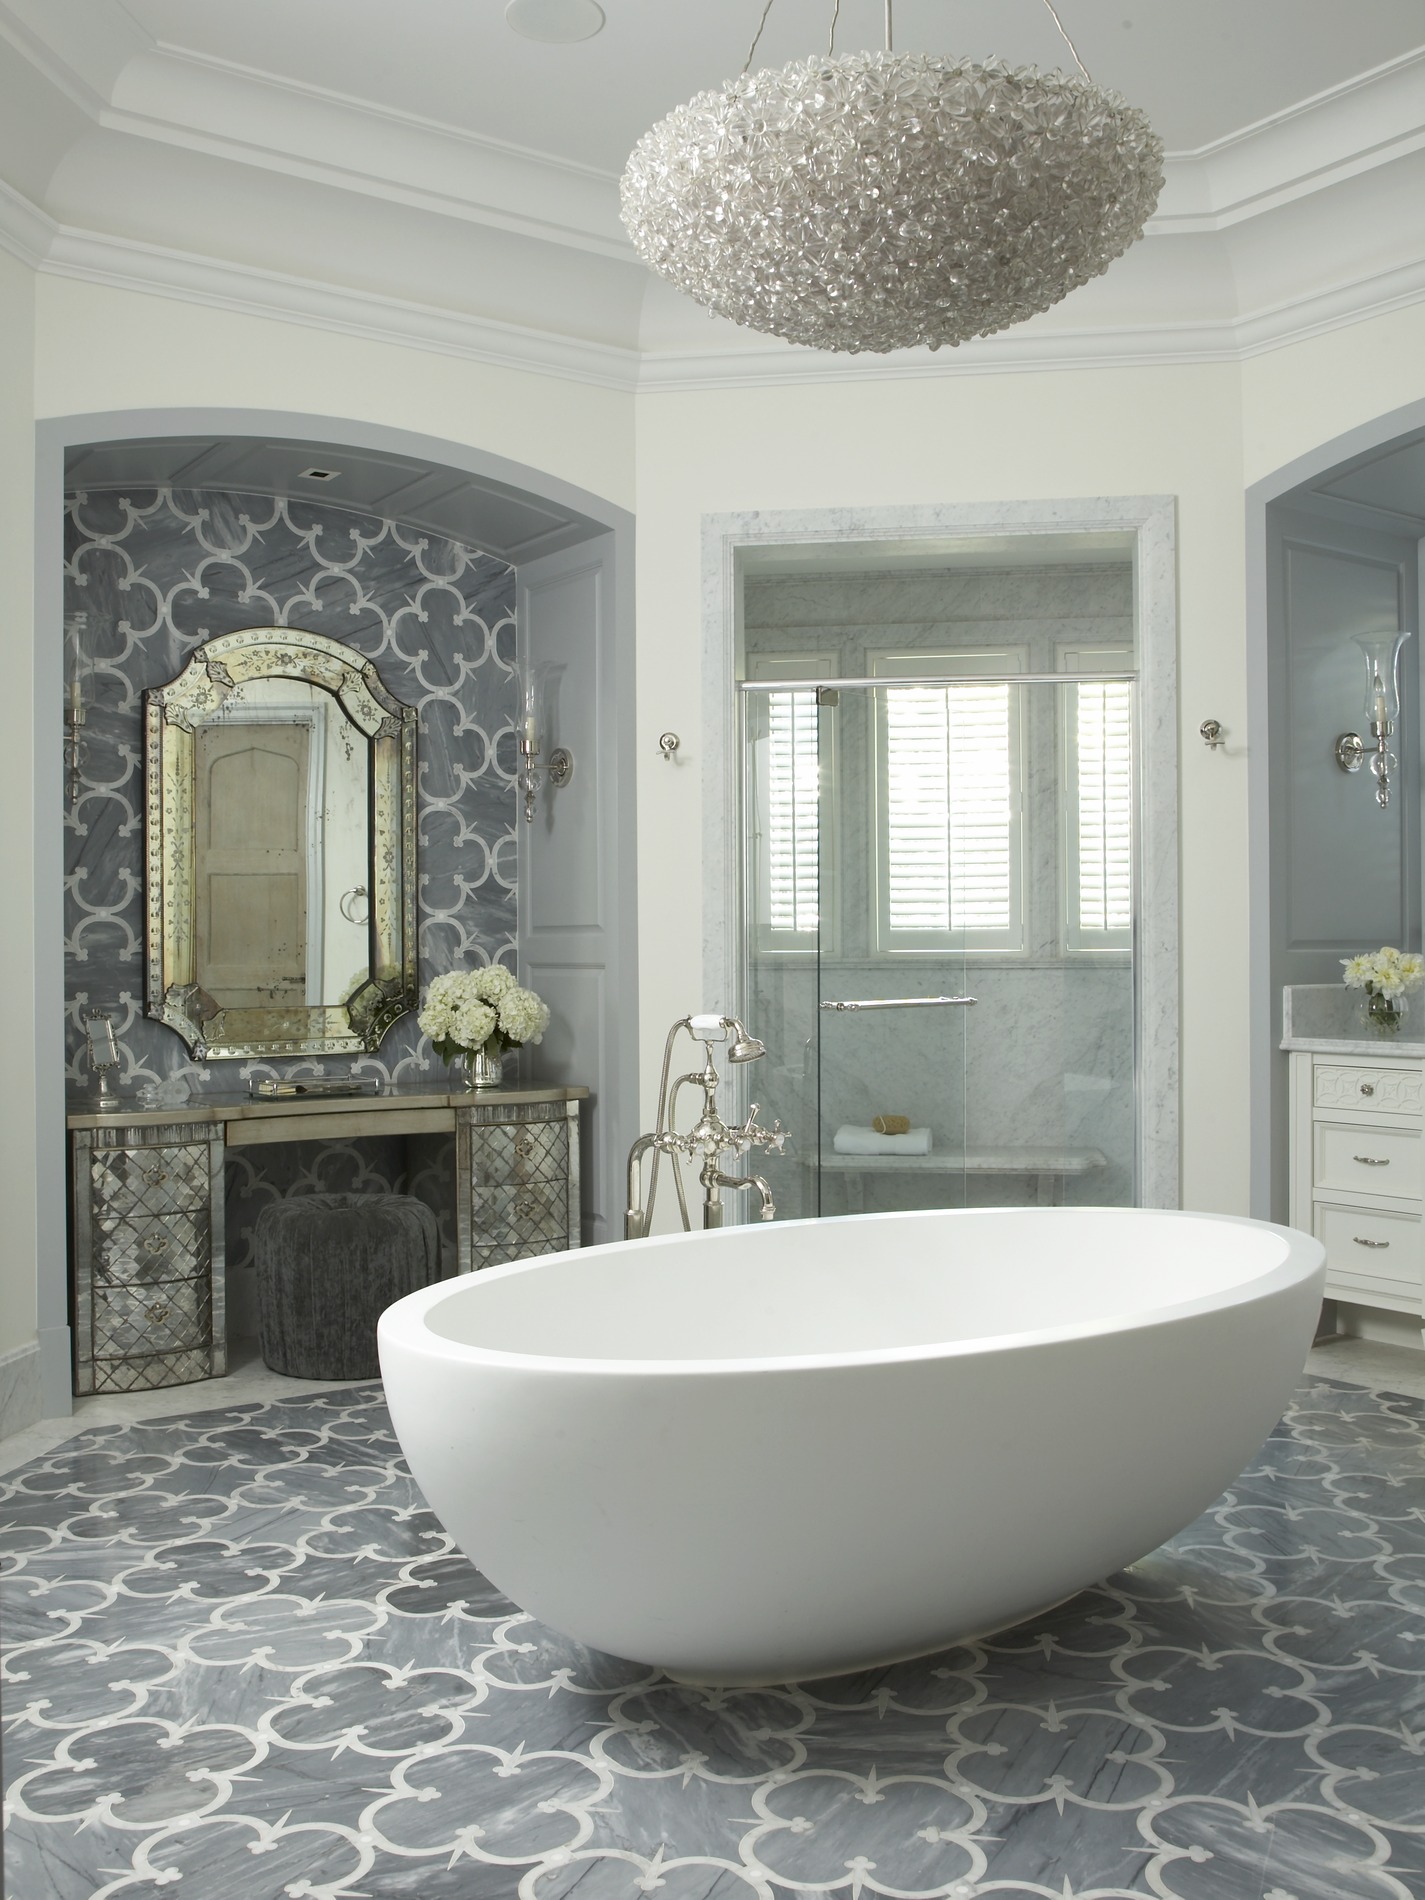 This is an image of a bathtub as a centrepiece in a bathroom design